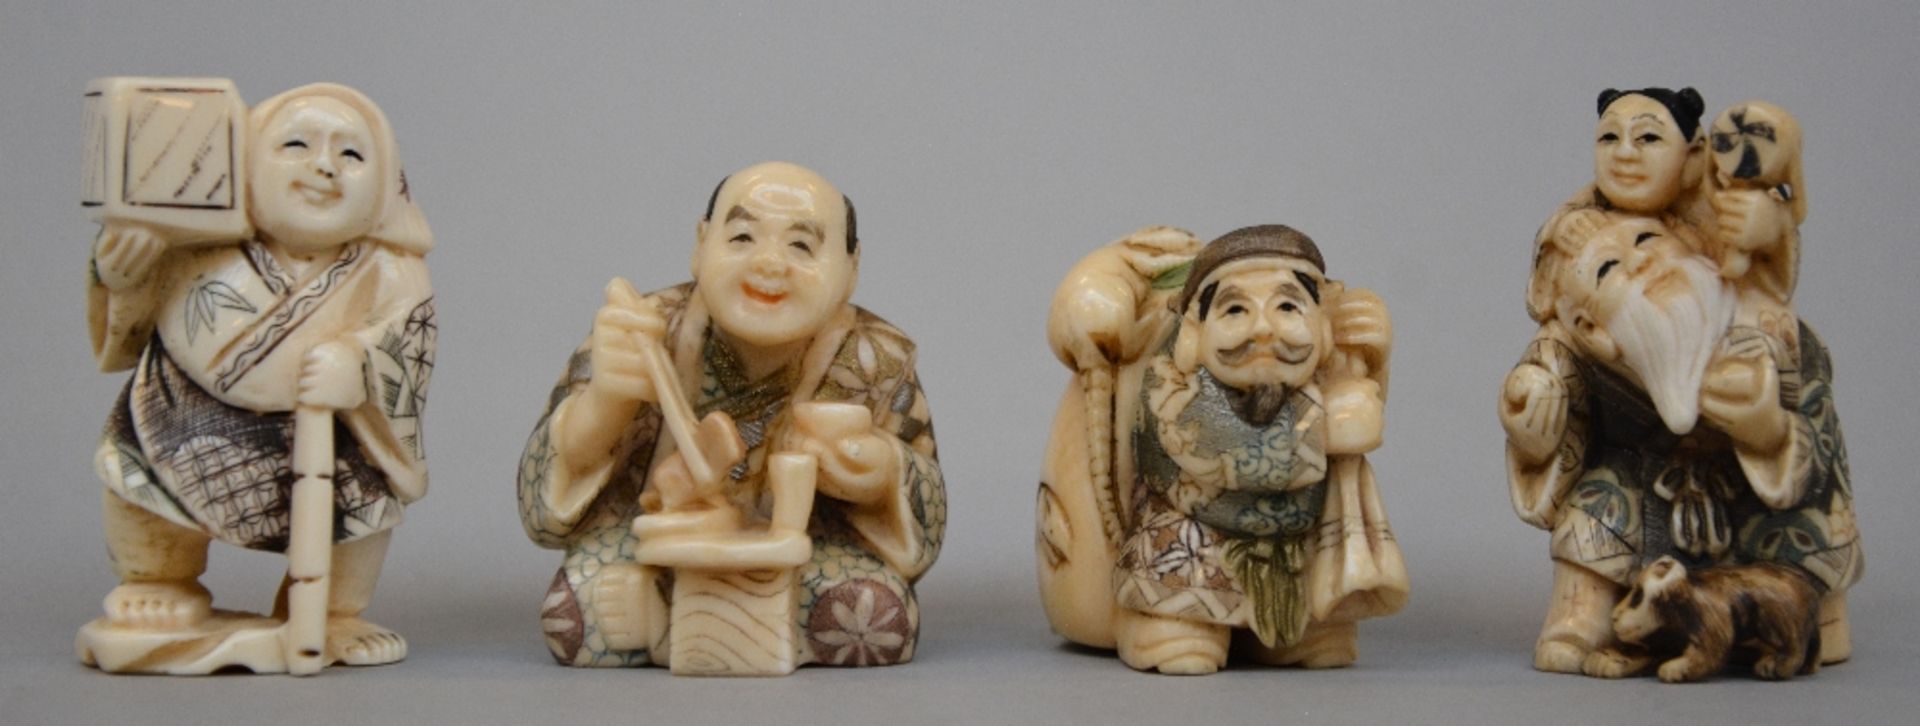 Seven ivory netsuke/okimino, scrimshaw decorated, first half of 20thC, H 5,2 - 4,1 cm, Total - Image 2 of 3